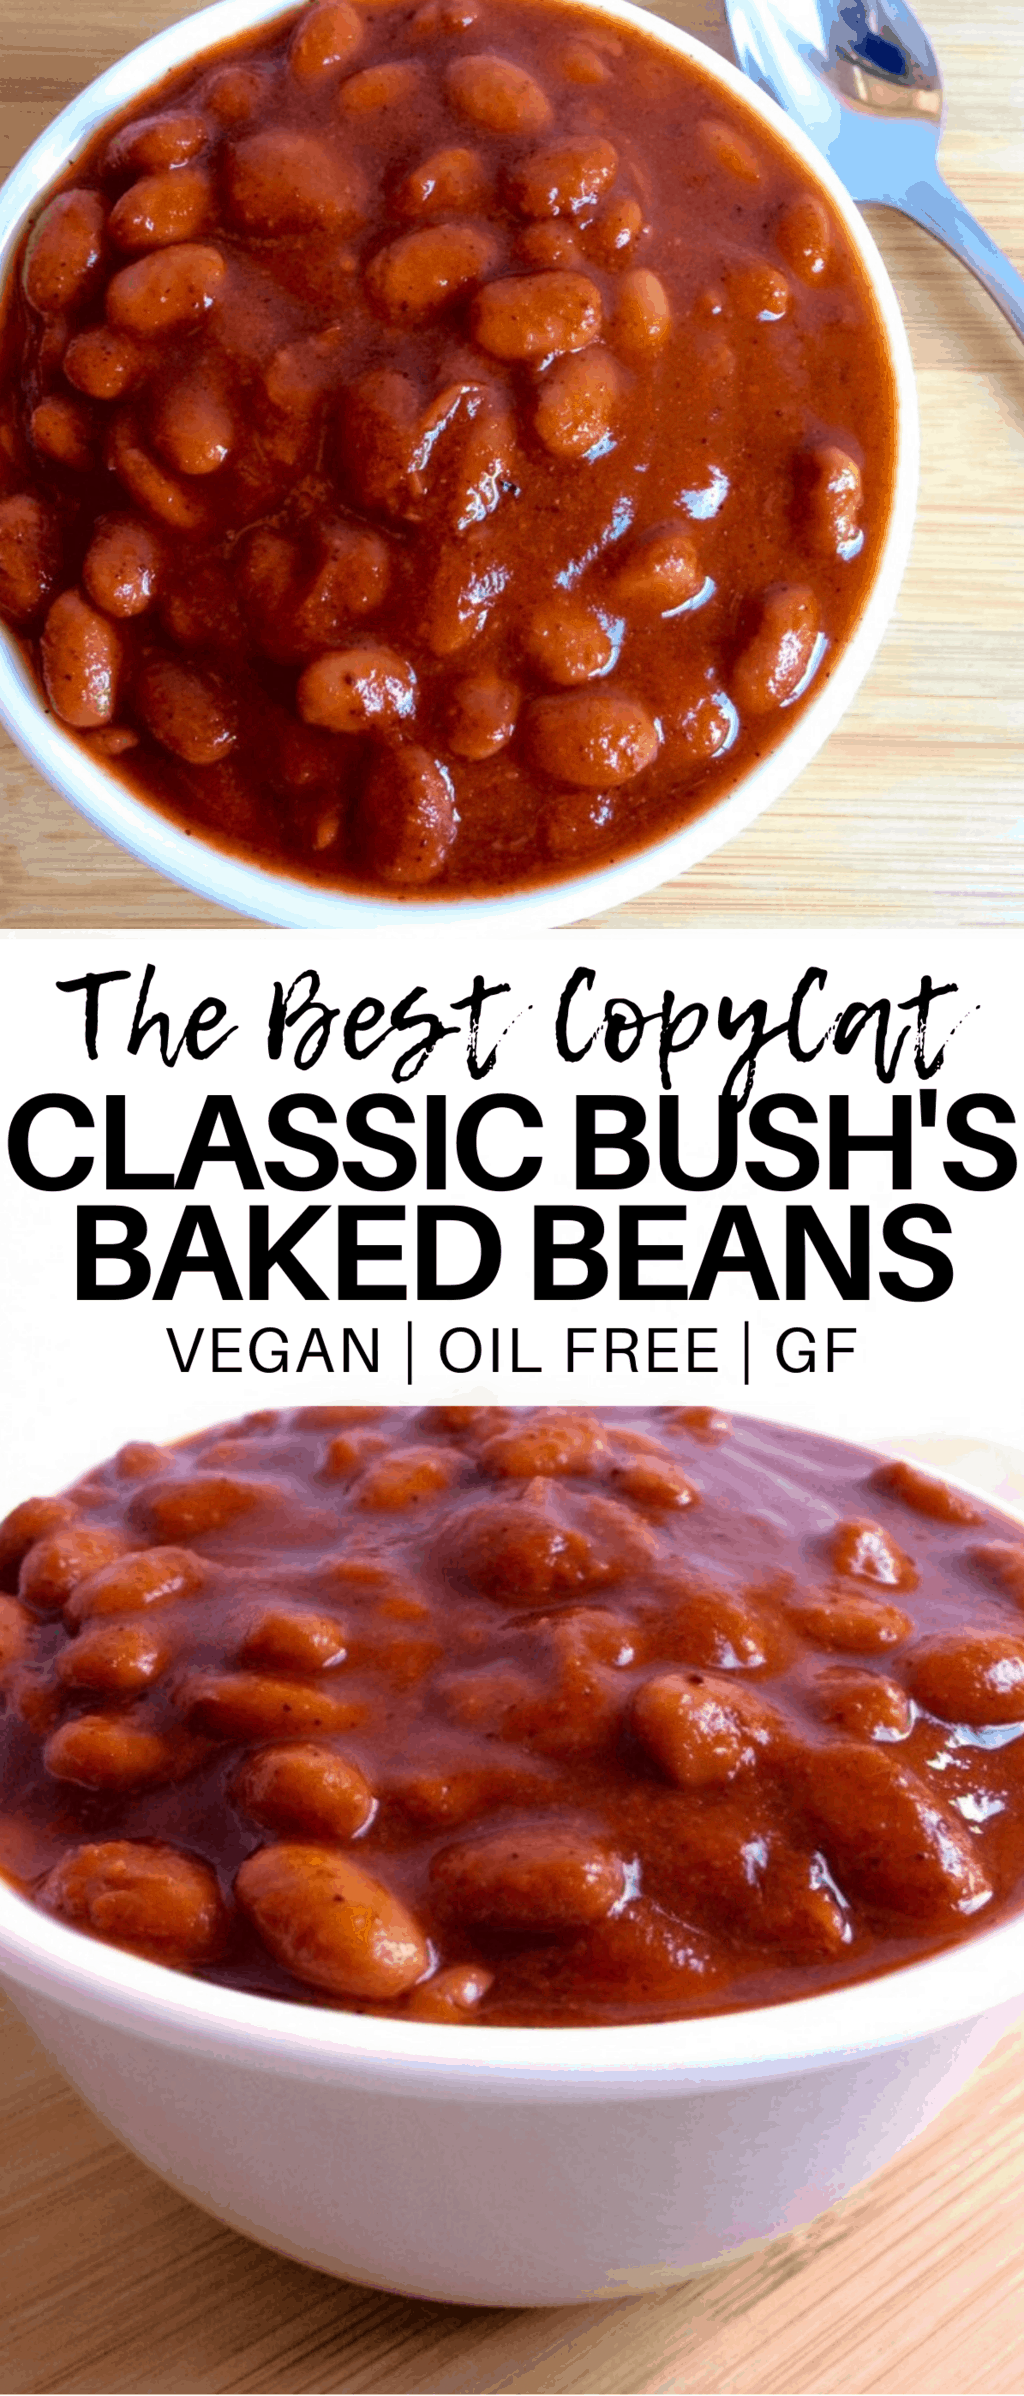 These Vegan Baked Beans are absolutely delicious!! They taste just like Bush's, but are way better for you. They are gluten-free, low-calorie, low-carb, dairy-free, and sugar-free. Sure to be loved by the whole family!